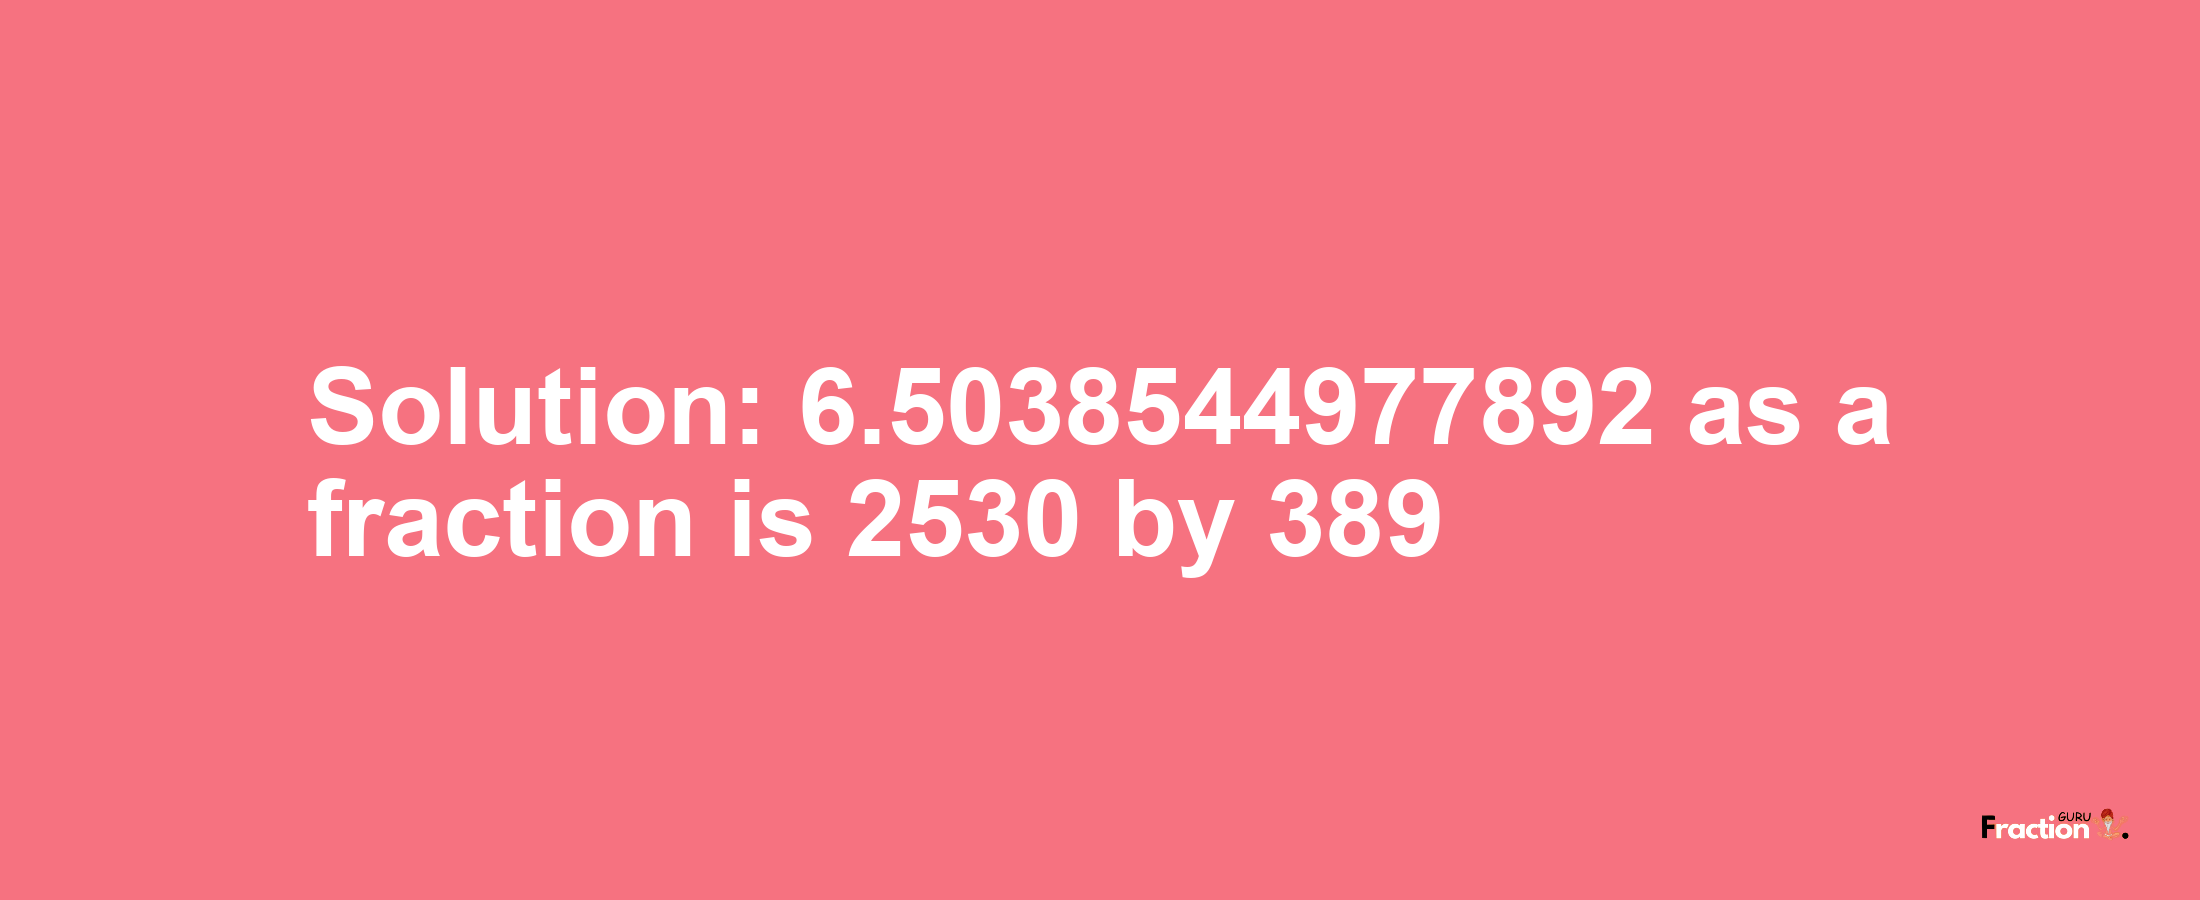 Solution:6.5038544977892 as a fraction is 2530/389